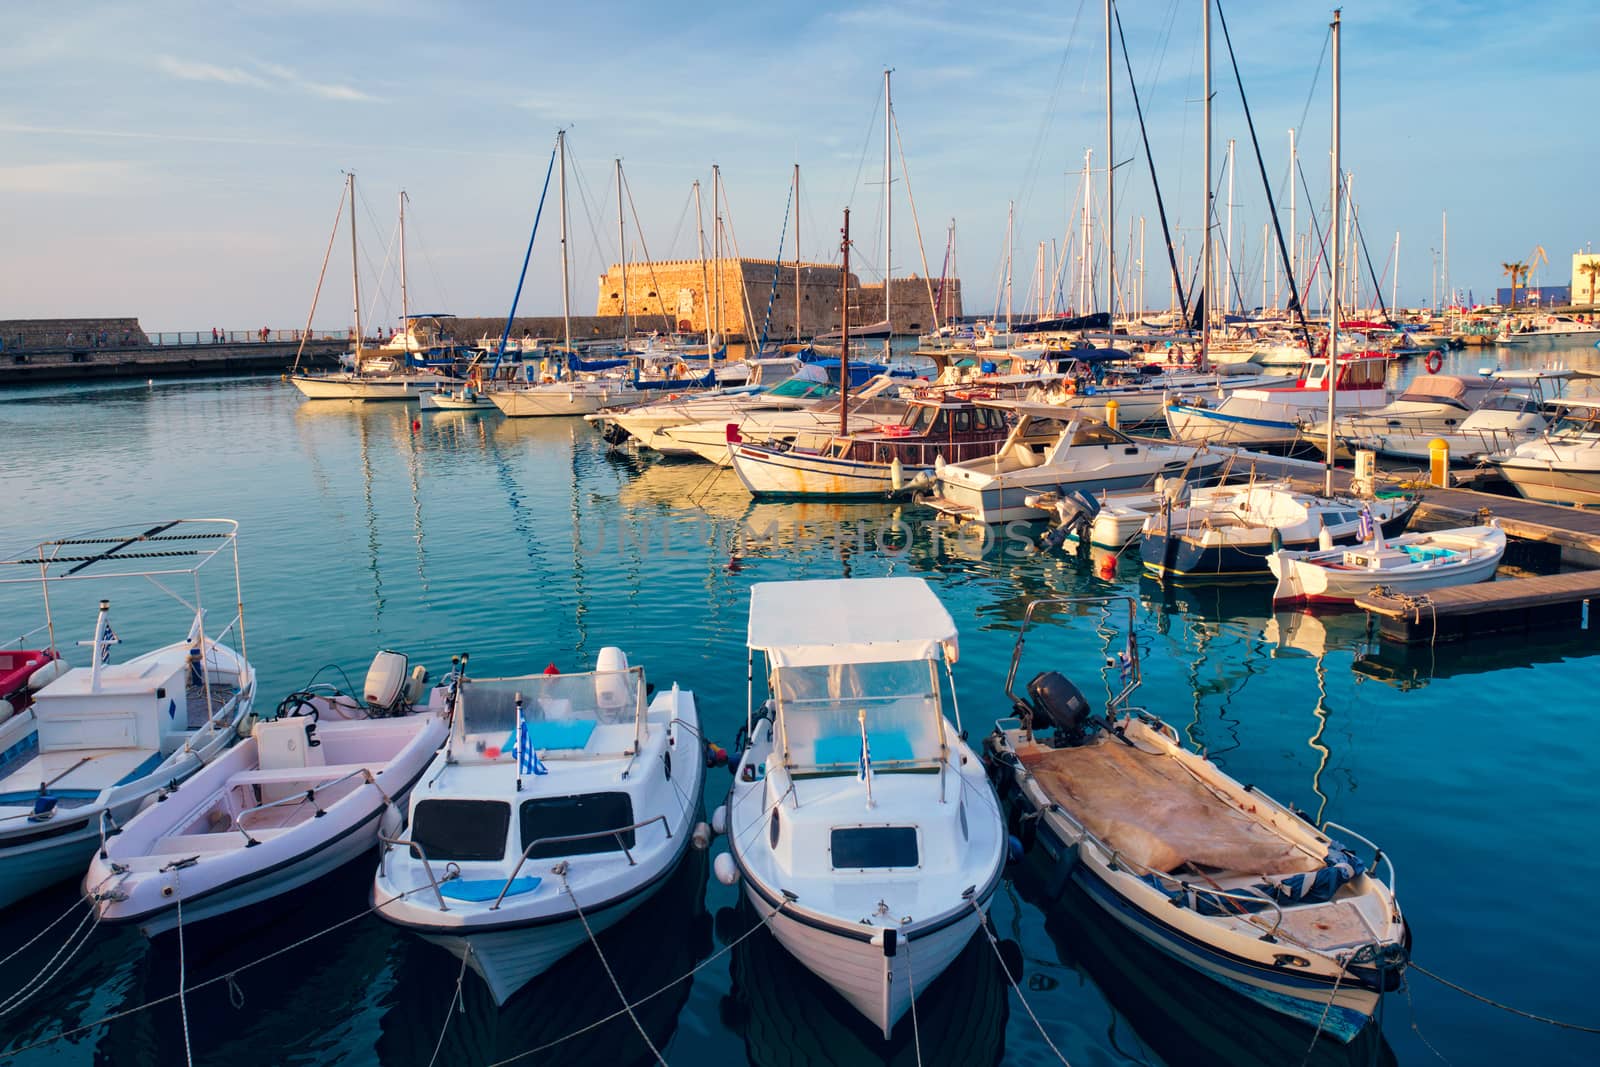 Venetian Fort castle in Heraklion and moored fishing boats, Crete Island, Greece on sunset